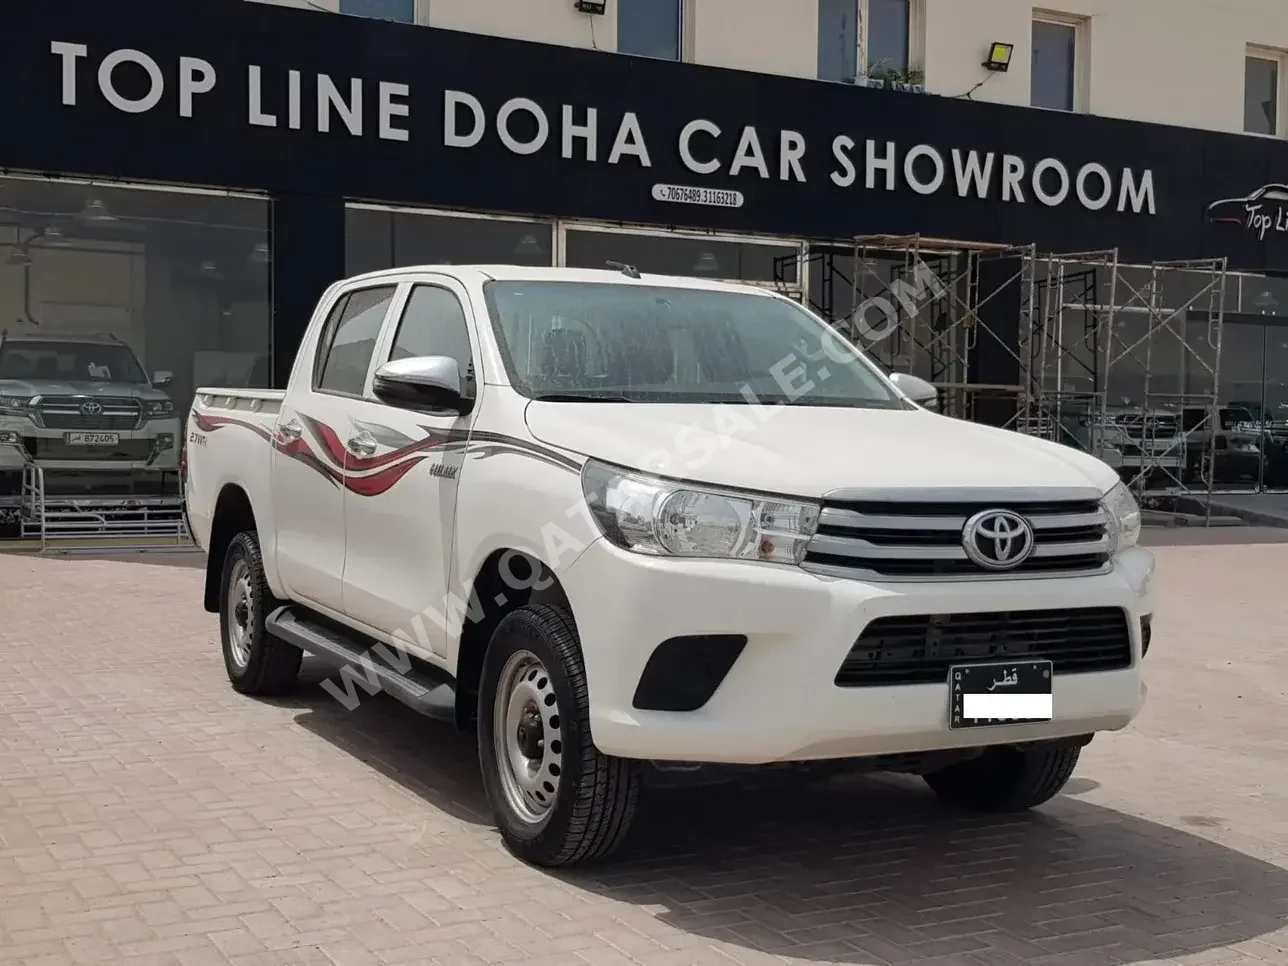 Toyota  Hilux  2020  Automatic  61,000 Km  4 Cylinder  Four Wheel Drive (4WD)  Pick Up  White